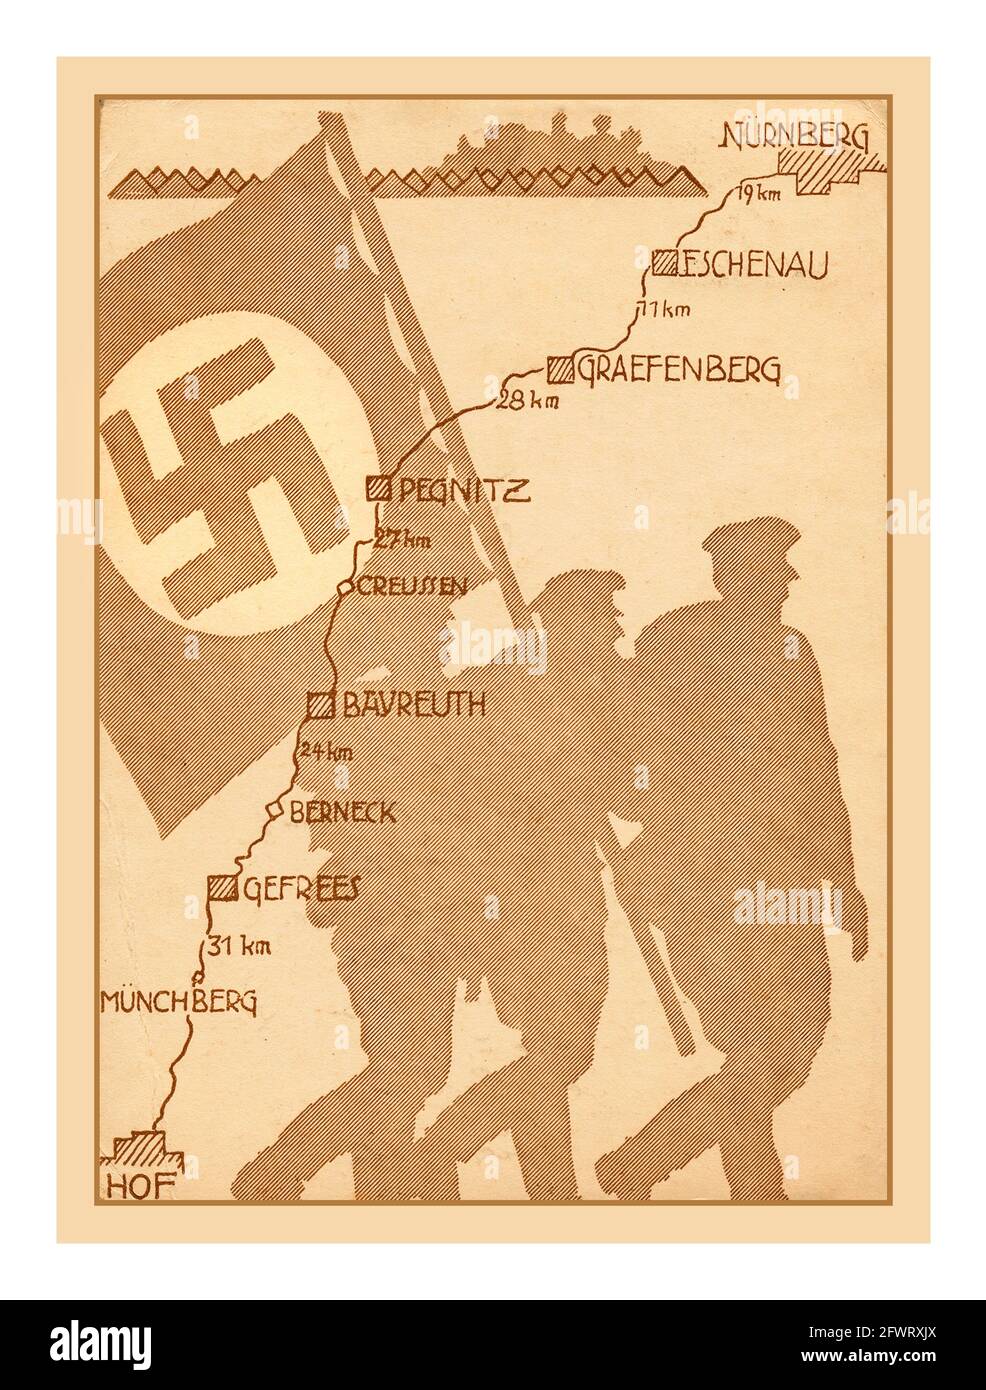 1930's Nazi Propaganda Poster Card with Swastika Flag carrying NSDAP marching over a map illustration to Nuremberg Germany Gau Saxony to the Nuremberg Rally 1936, Stock Photo